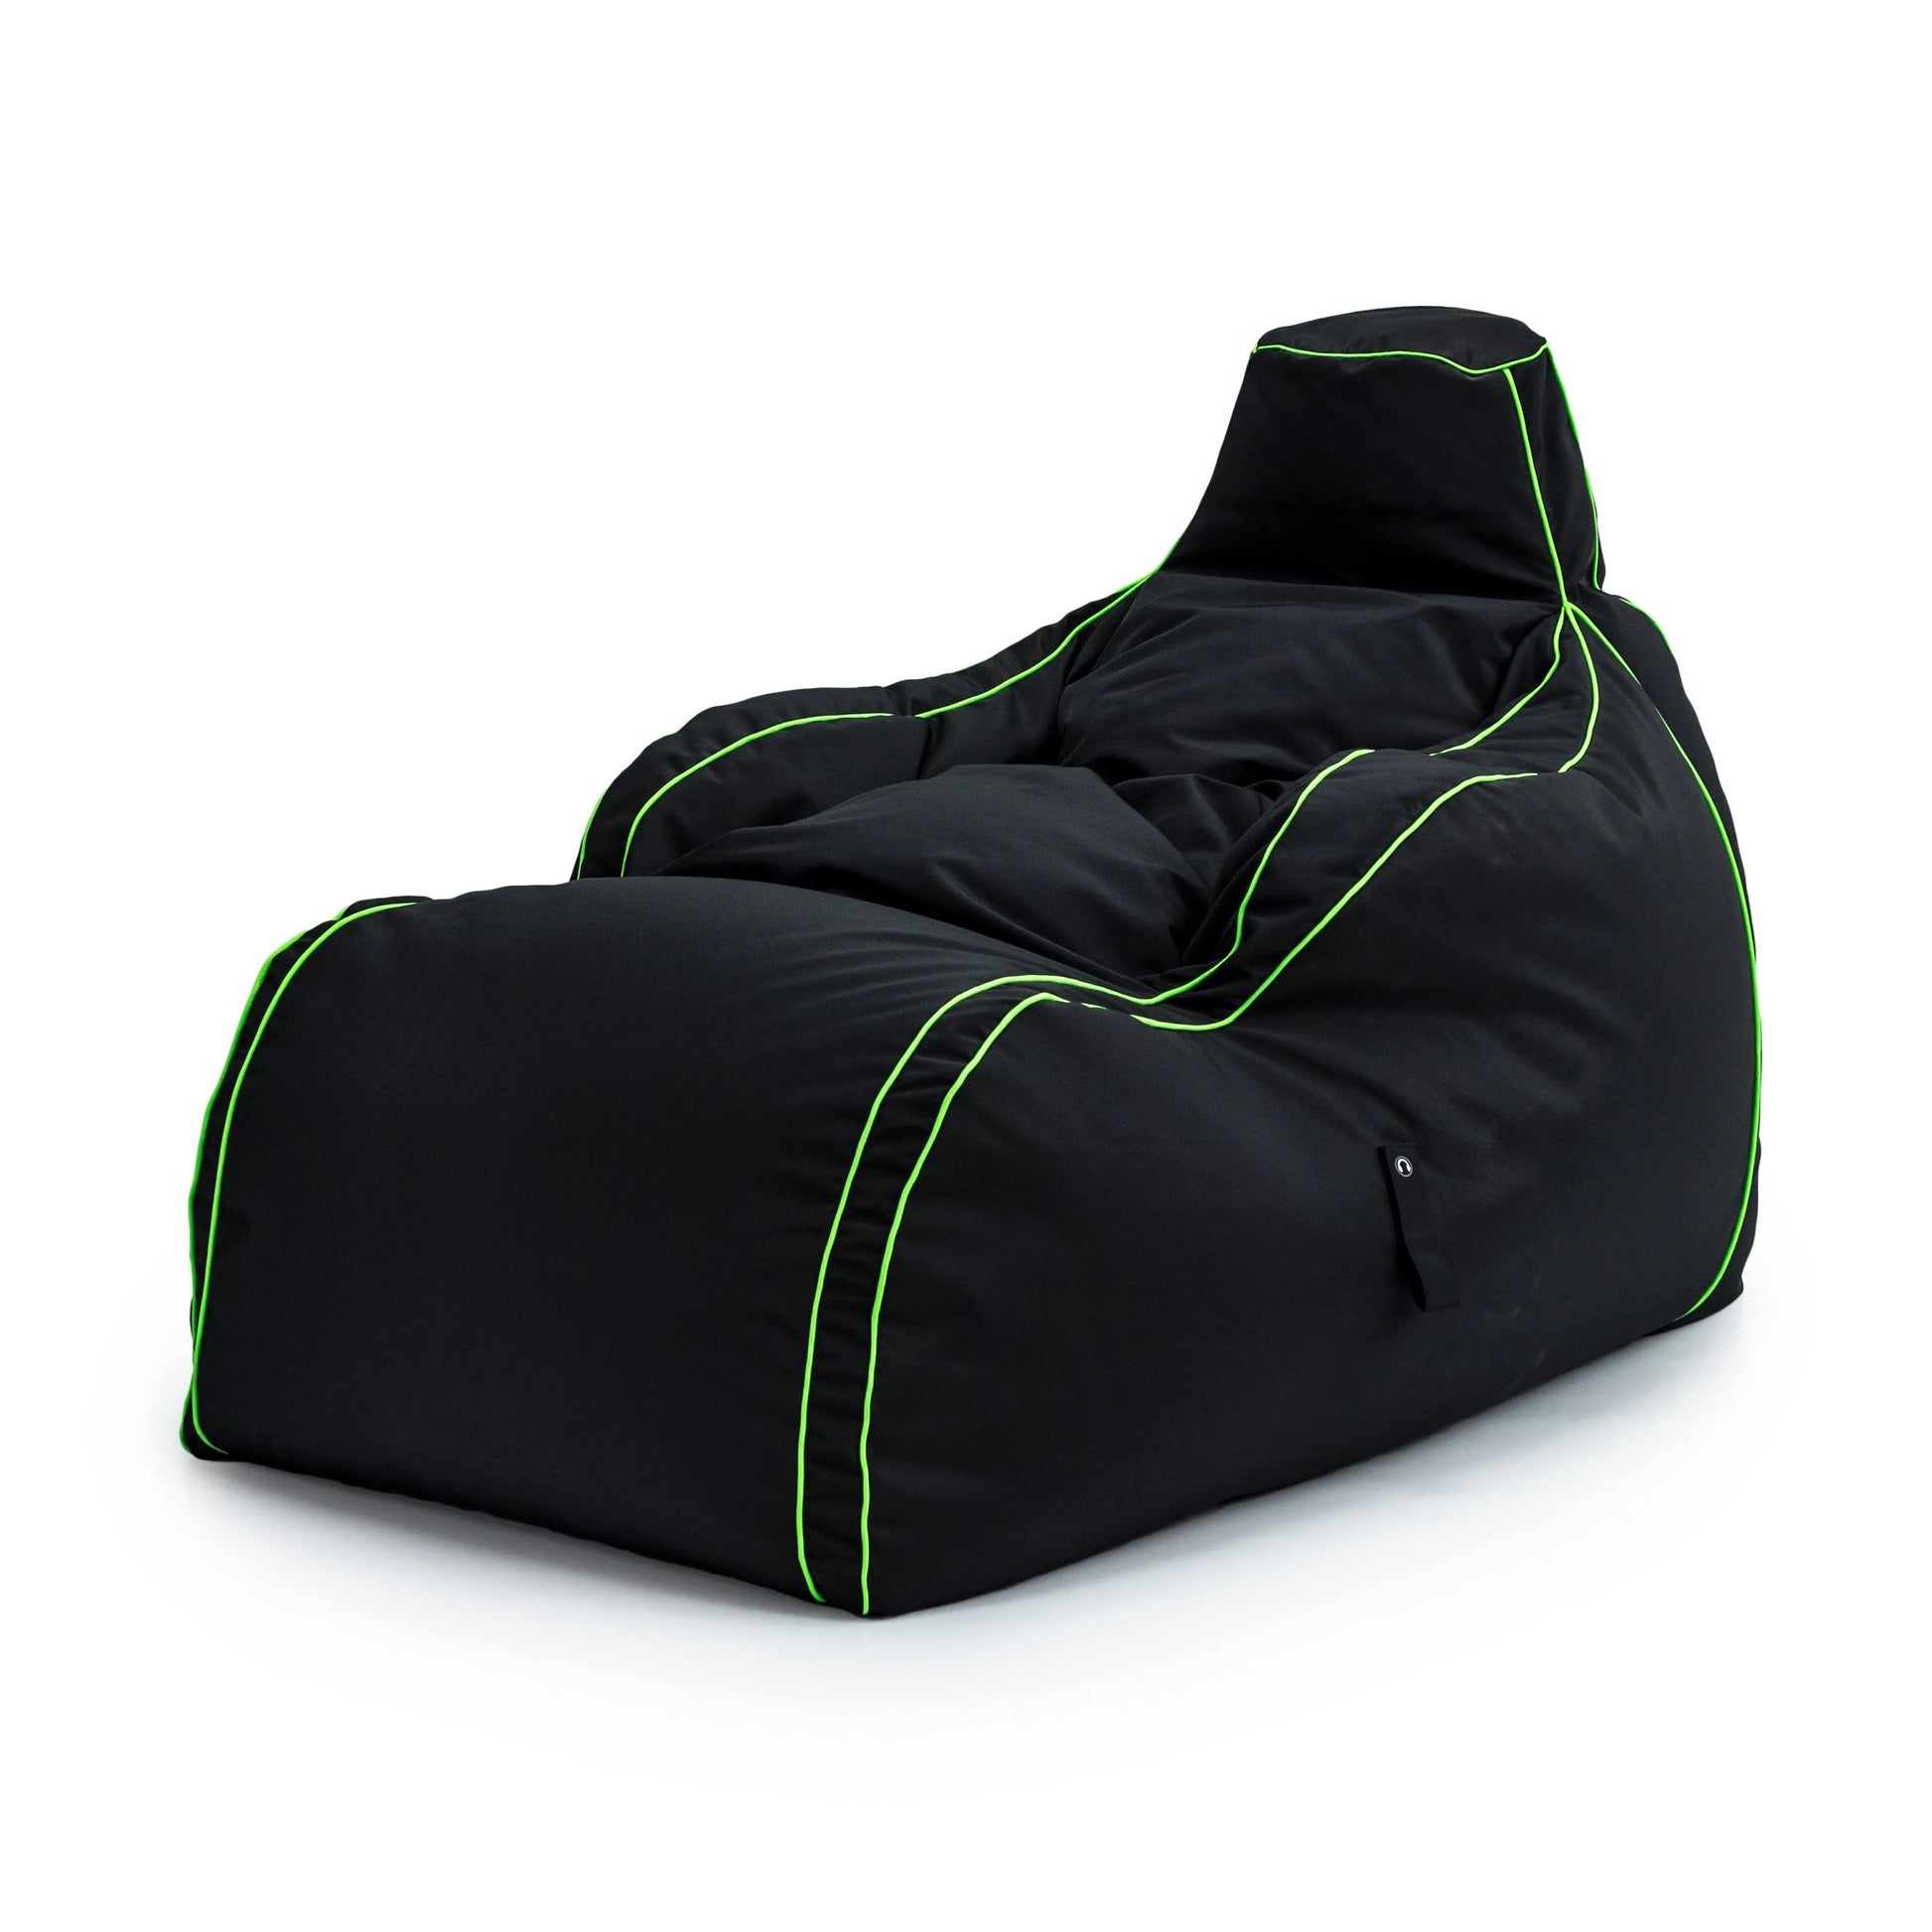 A black bean bag cover with neon green stripes sits on a white background.